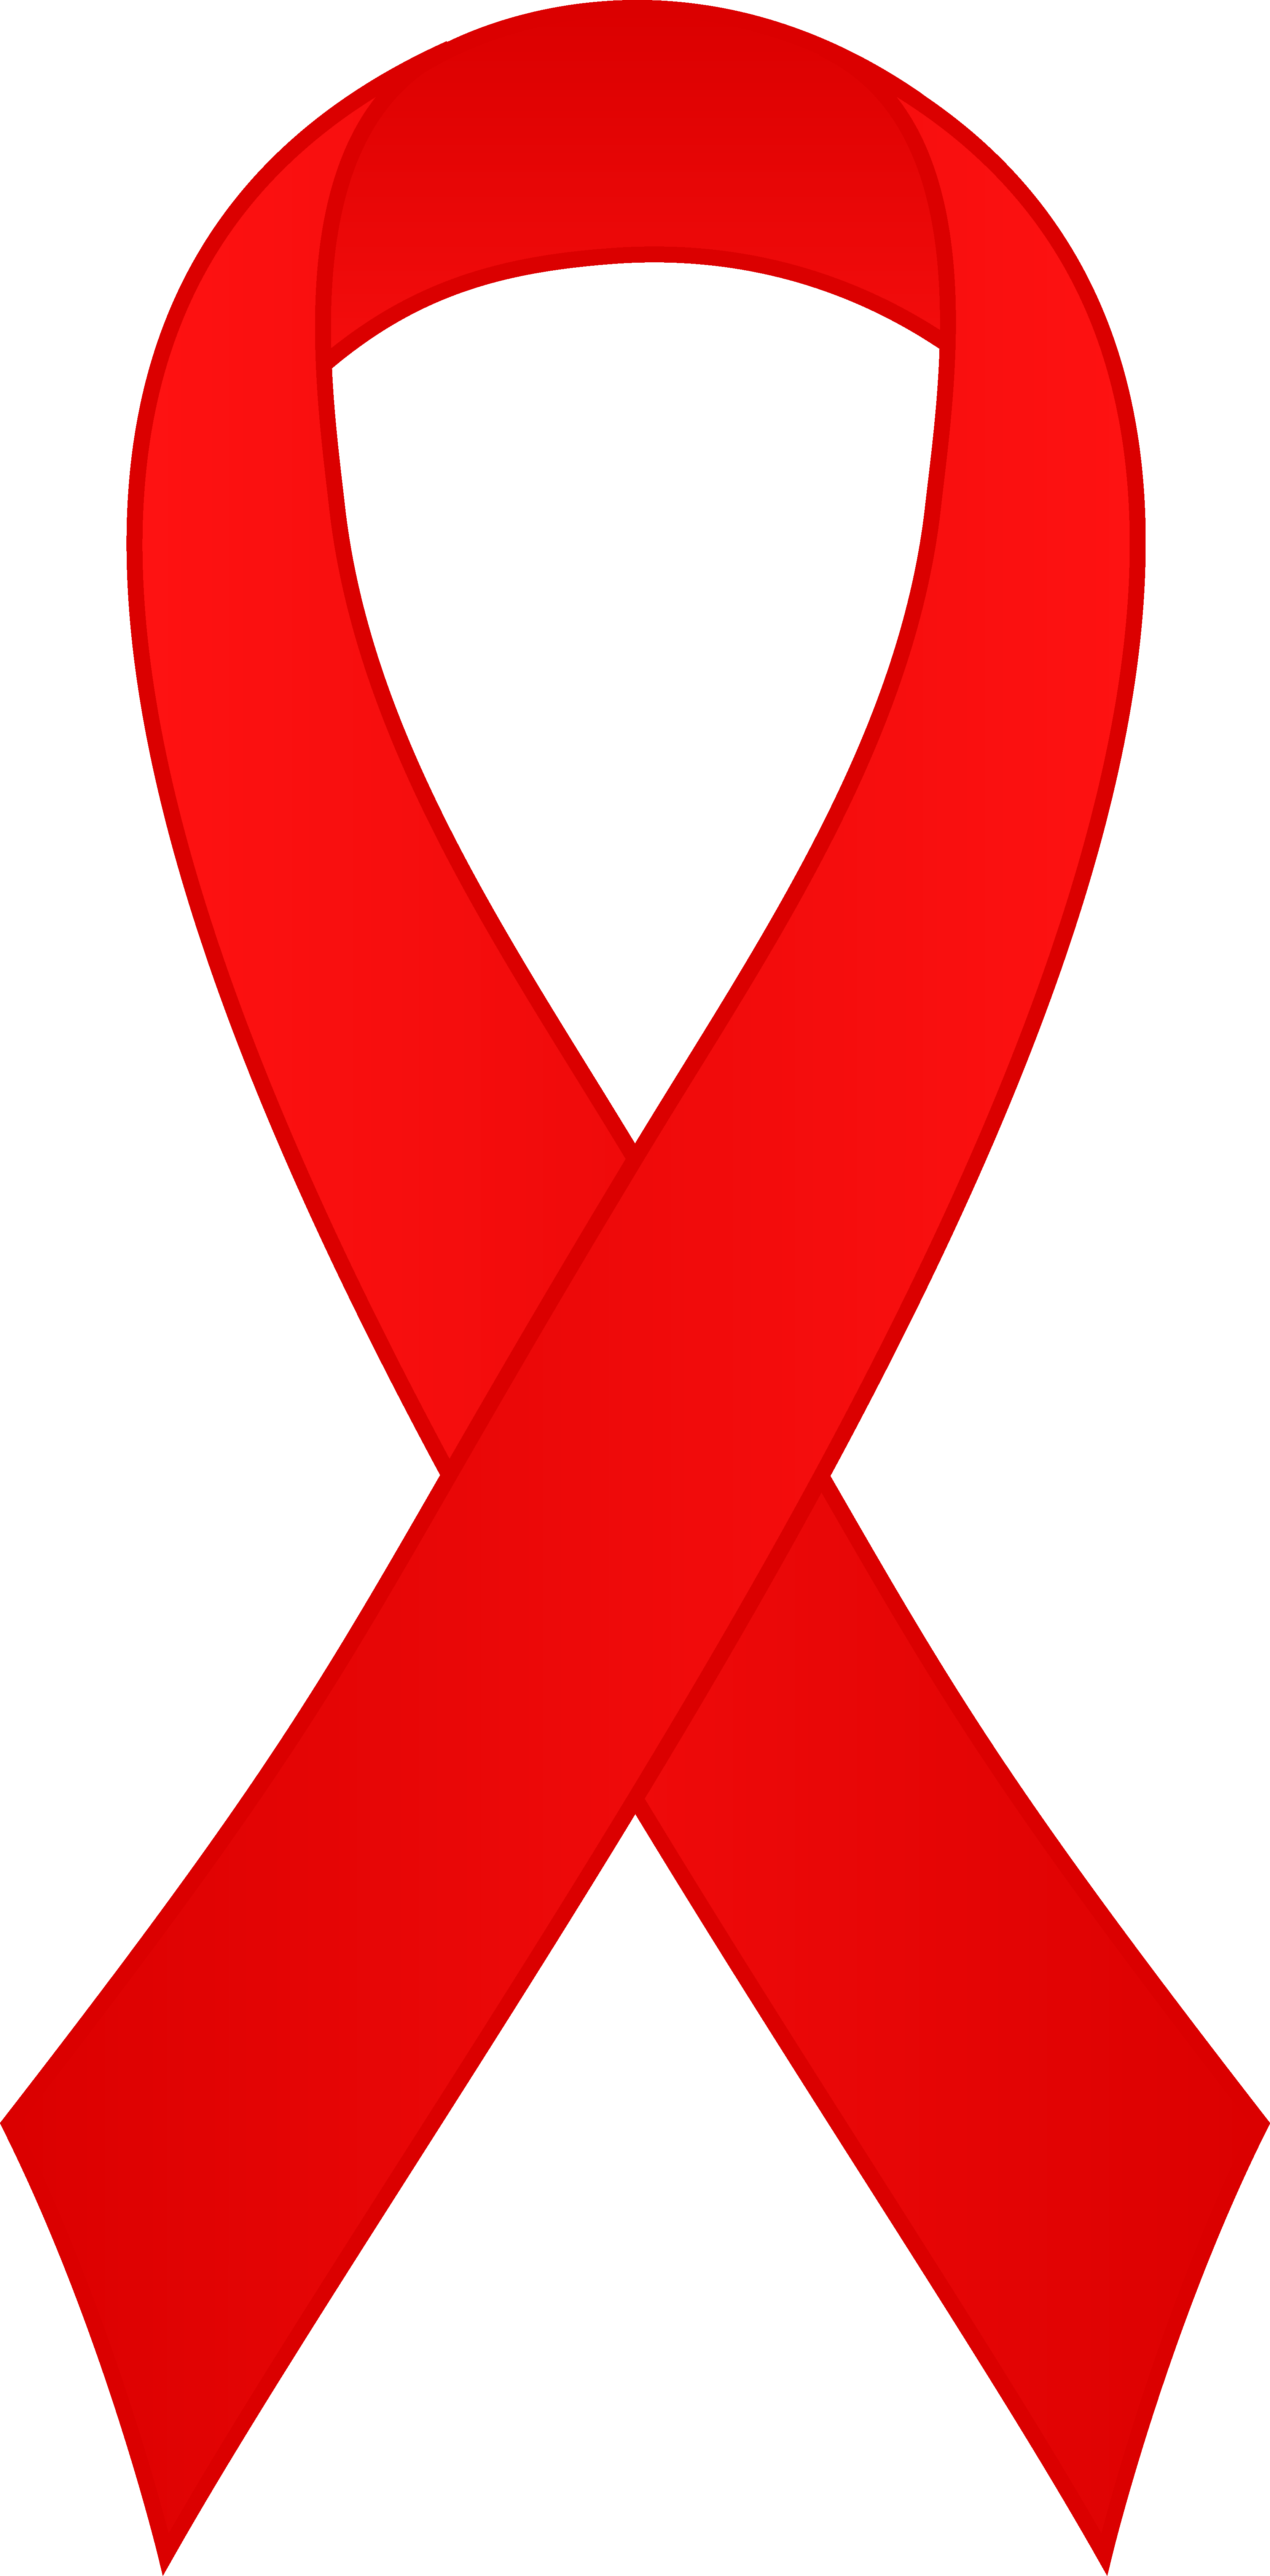 Dictionary clipart content. Red awareness ribbon free